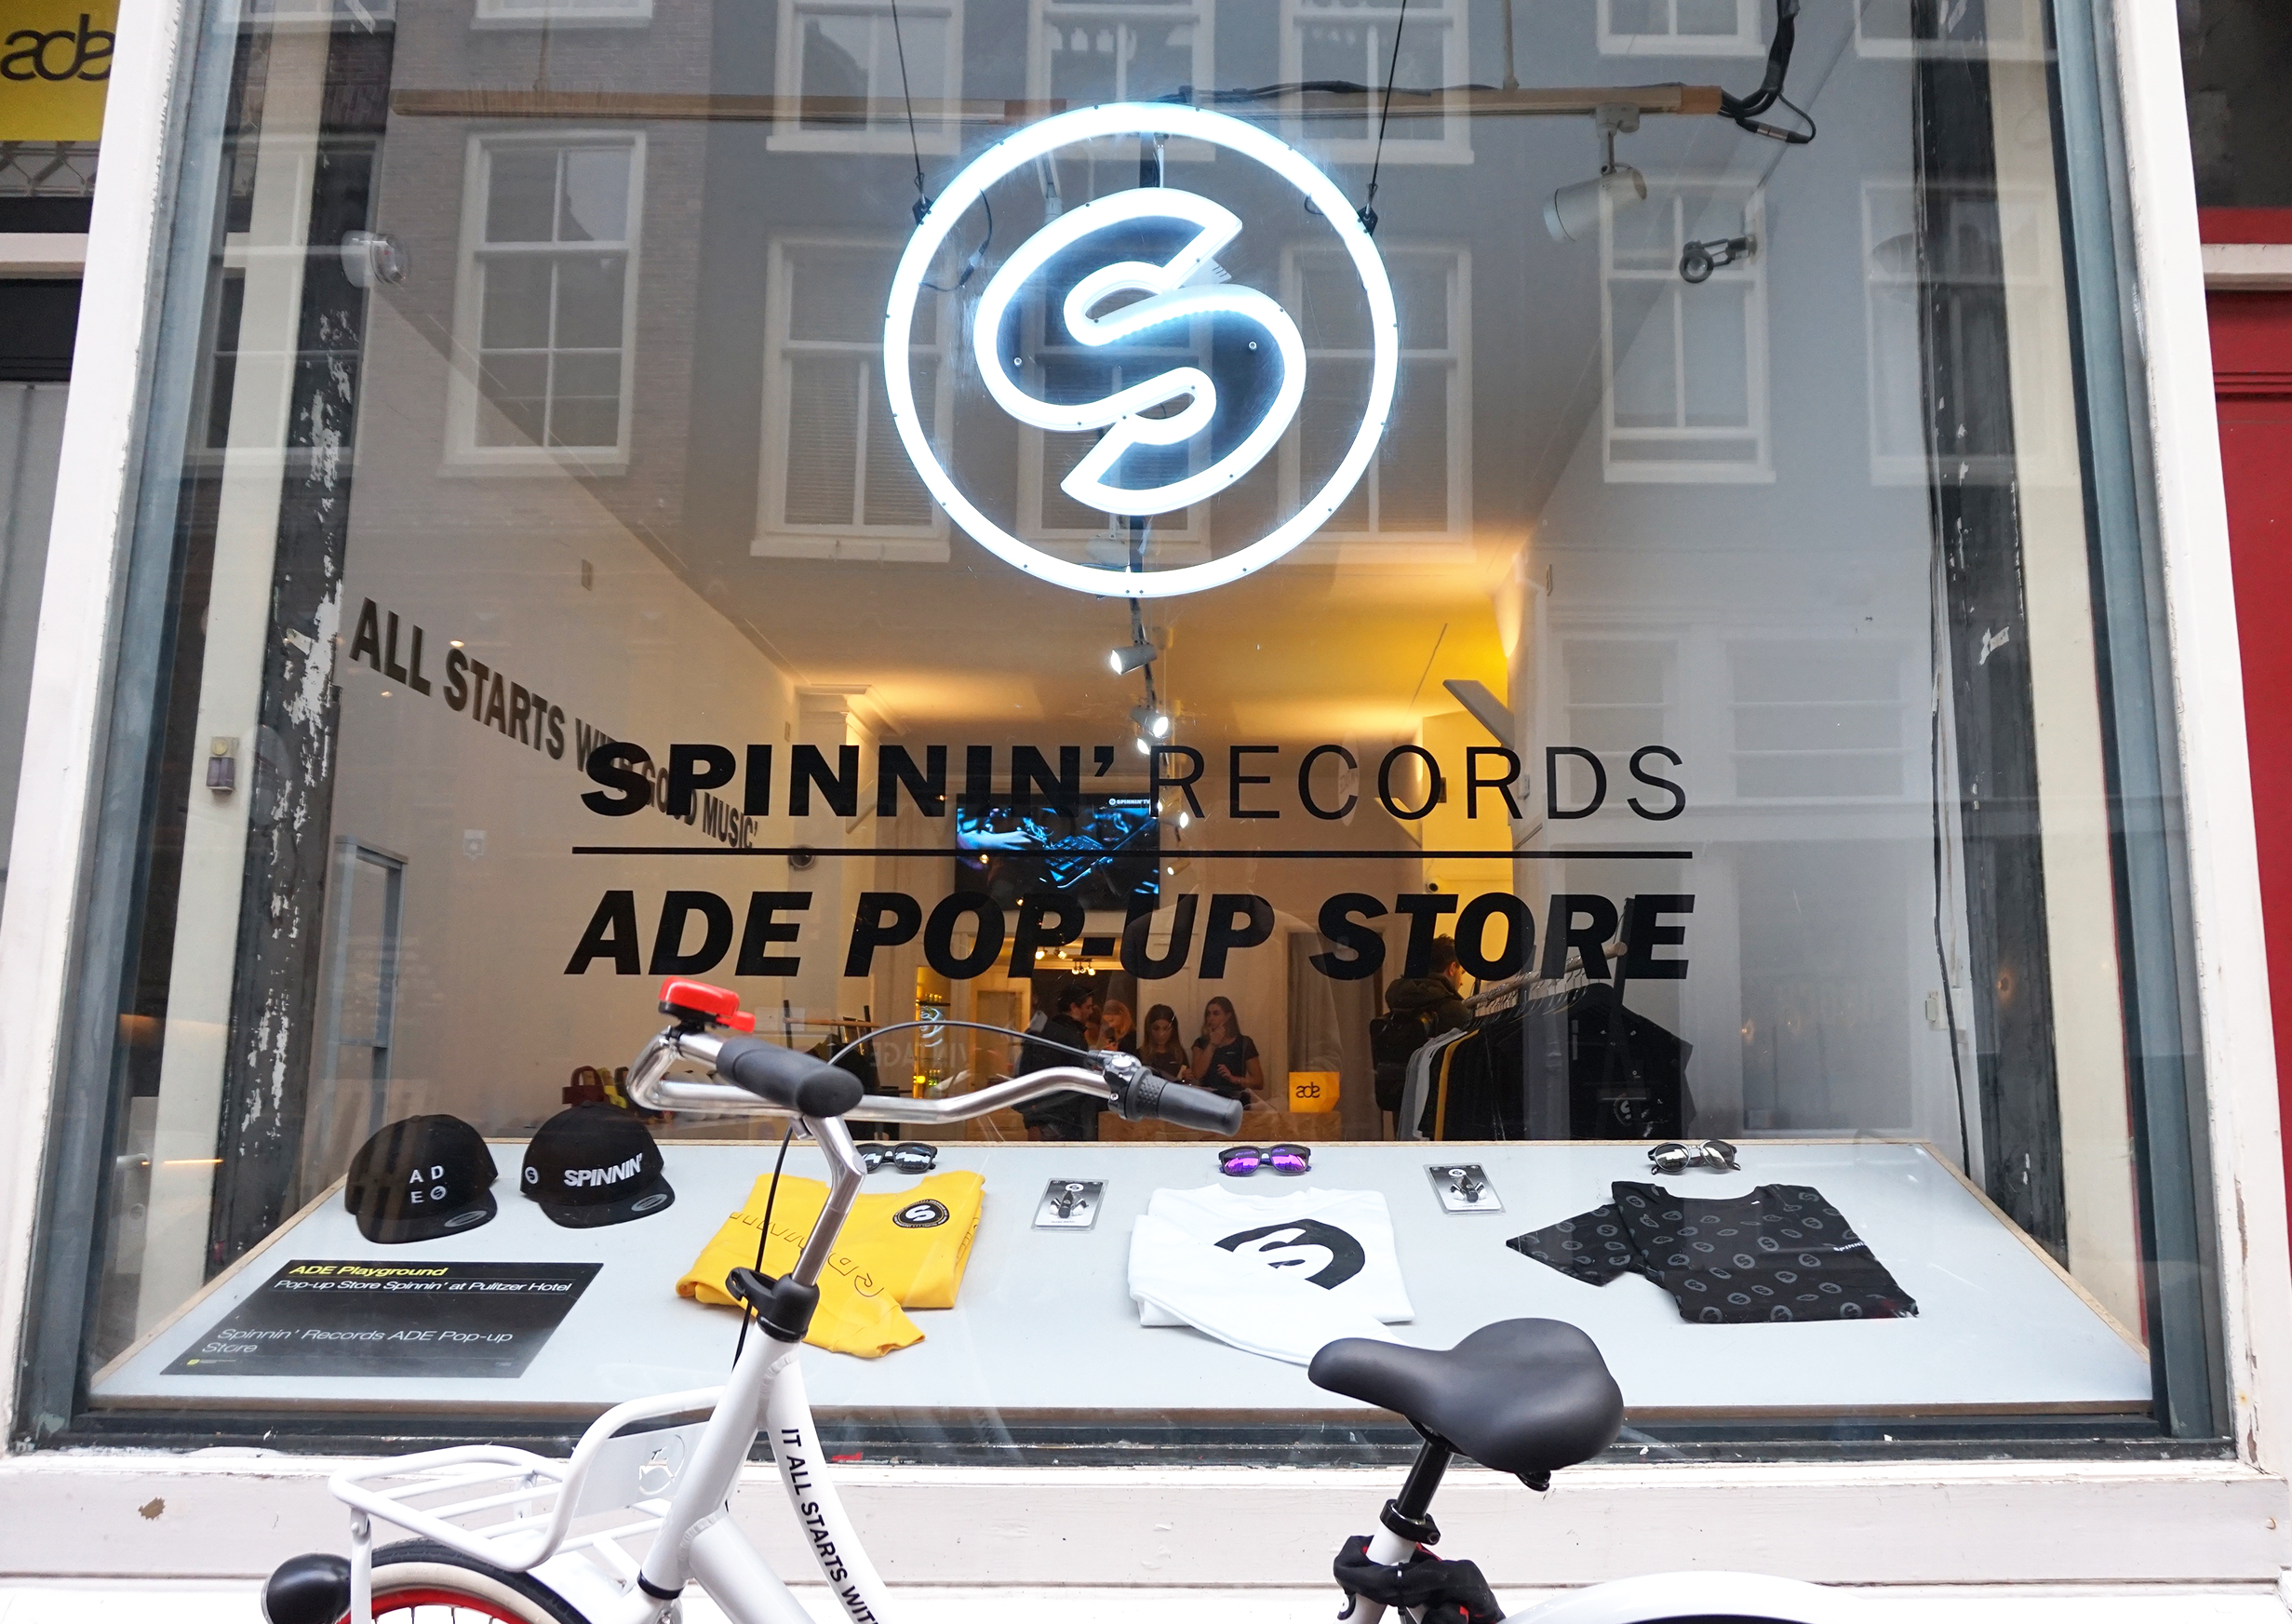 Ade Report Spinnin Records On Wednesday News Spinnin Records Minimum 5 chars required for search! ade report spinnin records on